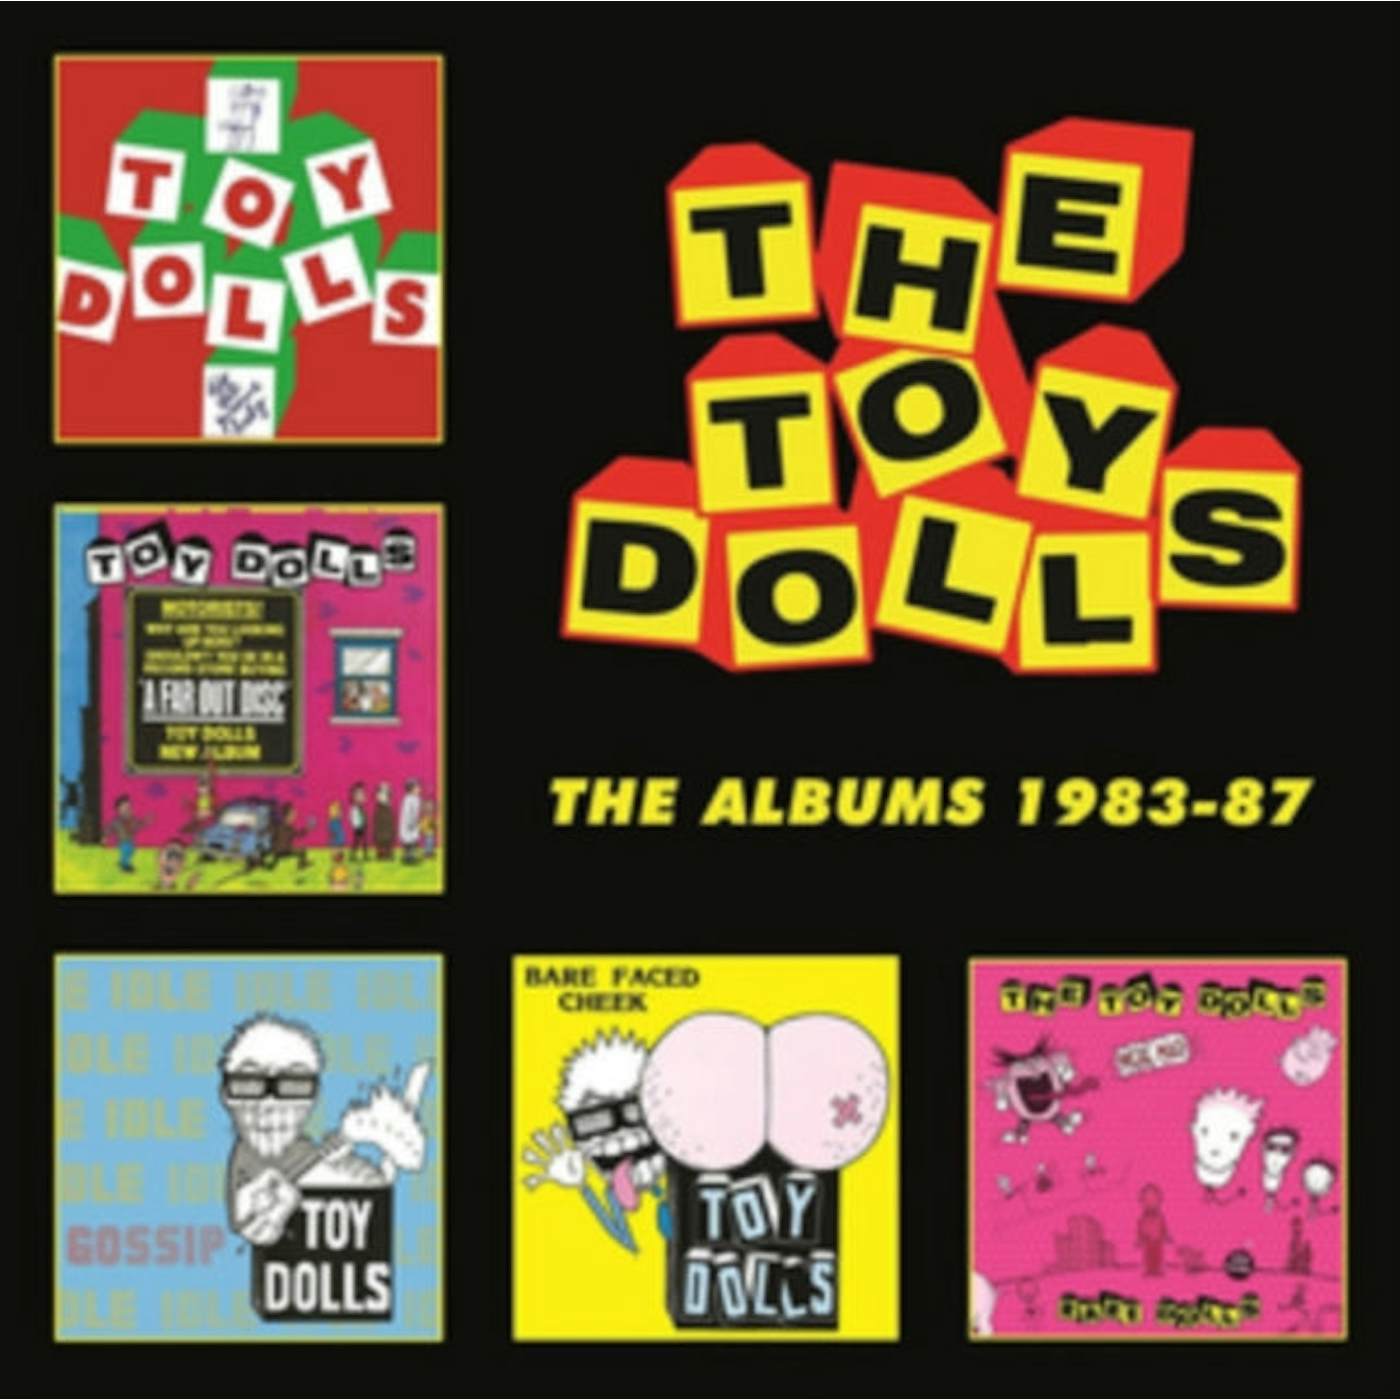 The Toy Dolls CD - The Albums 19 83-87